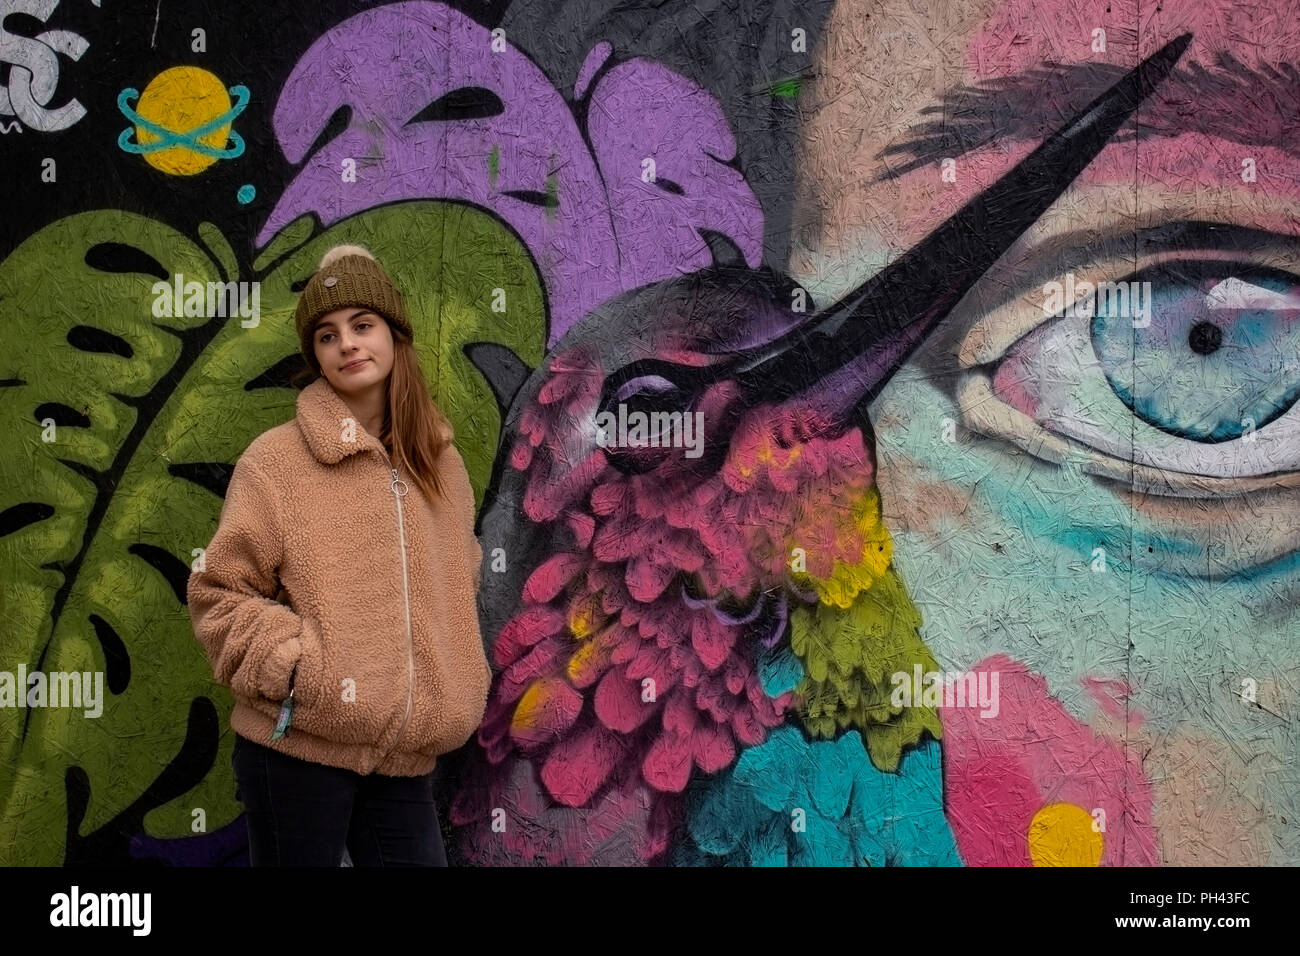 Young girl wearing a pom pom hat in front of a colourful bird art graffiti Stock Photo